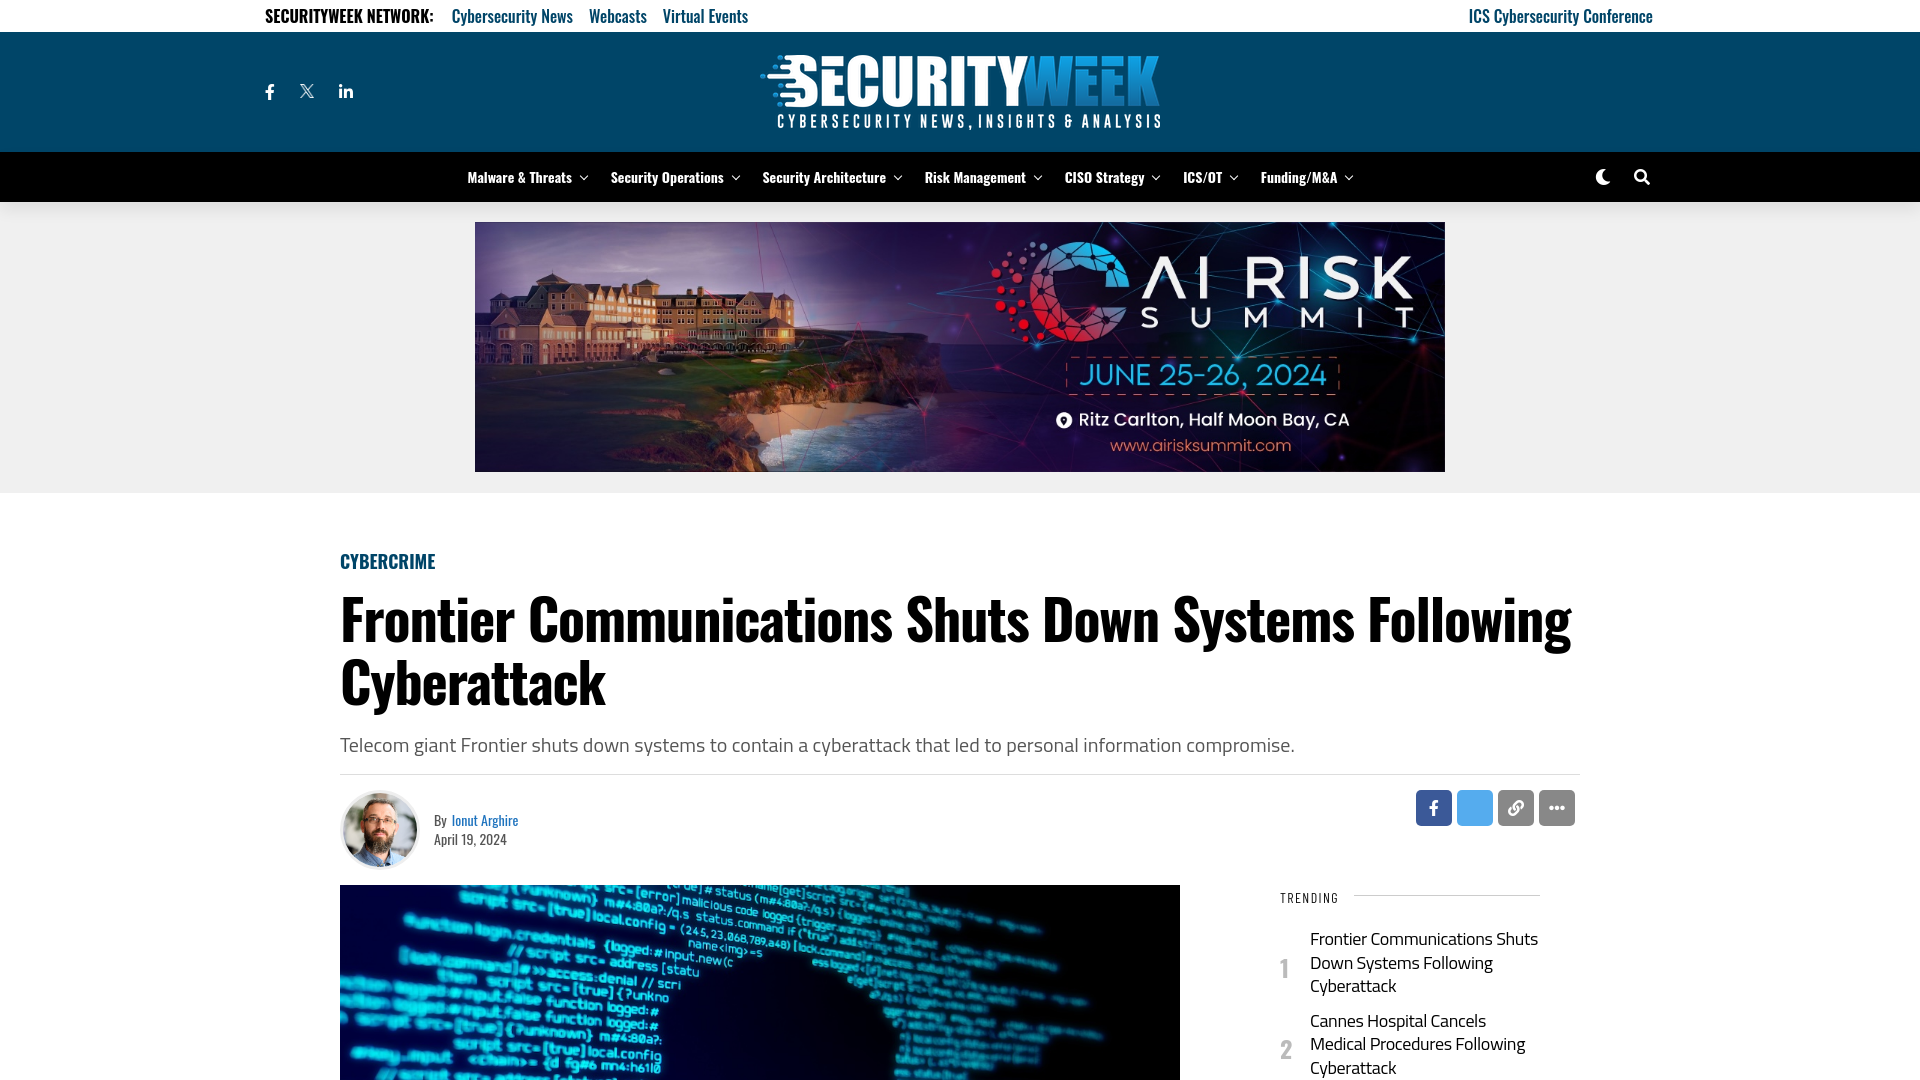 Frontier Communications Shuts Down Systems Following Cyberattack - SecurityWeek